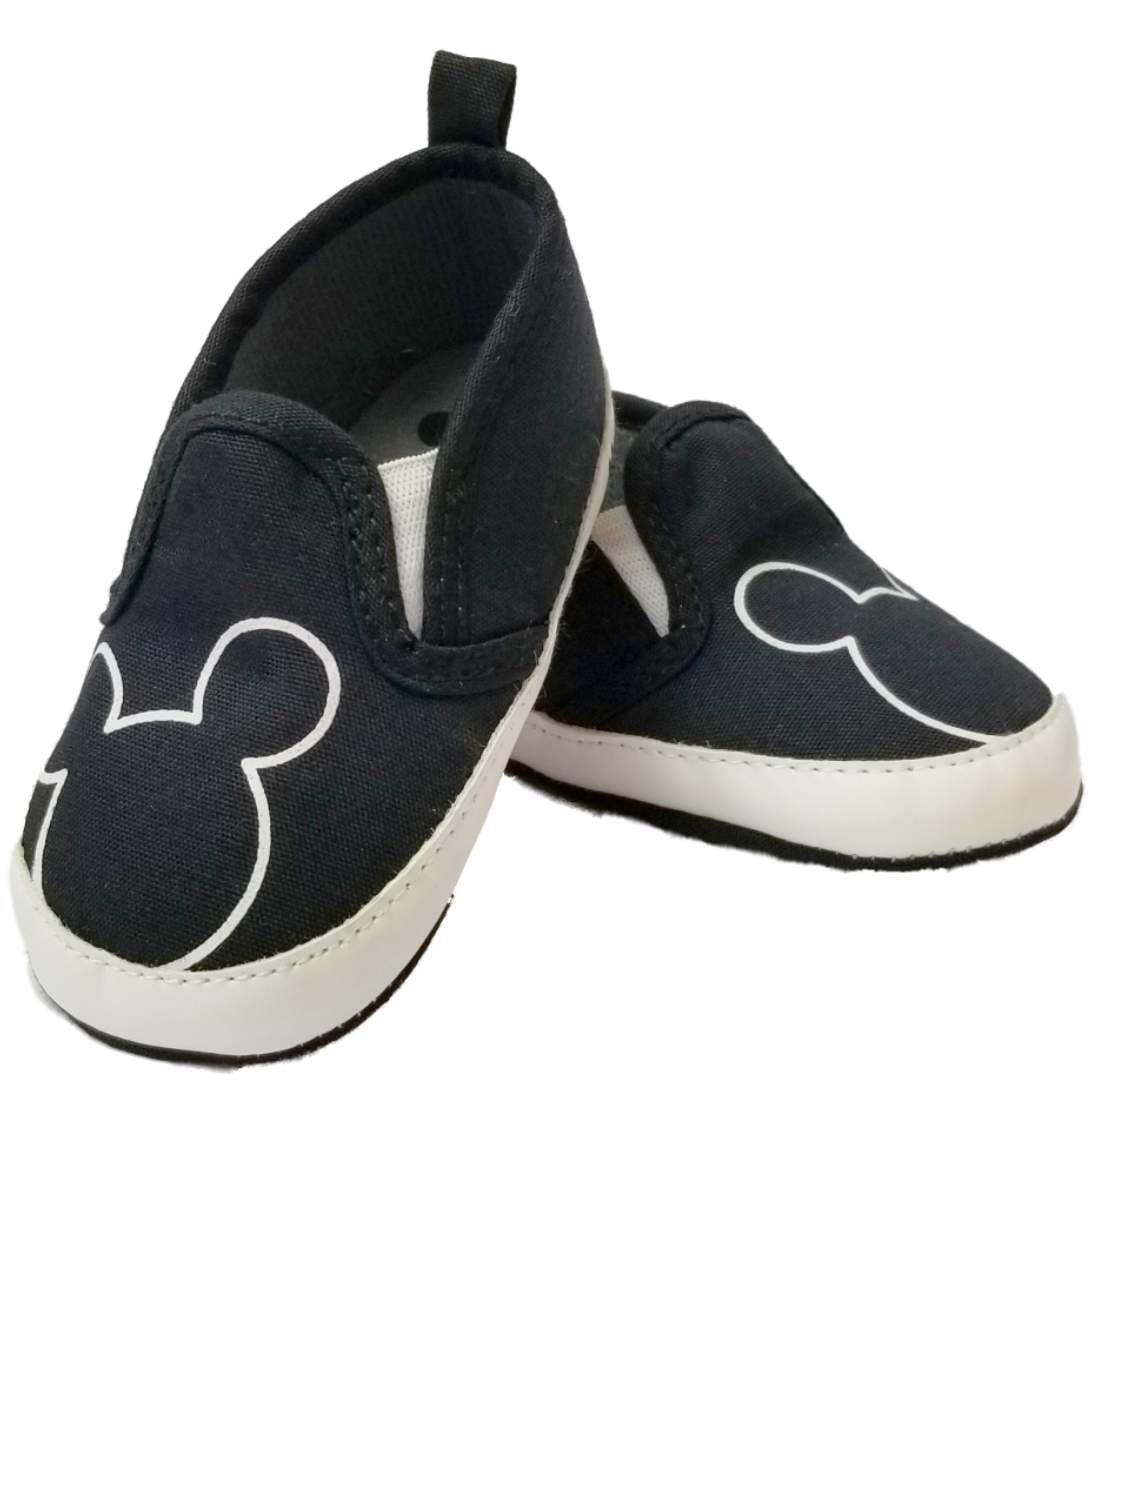 mickey mouse shoes walmart